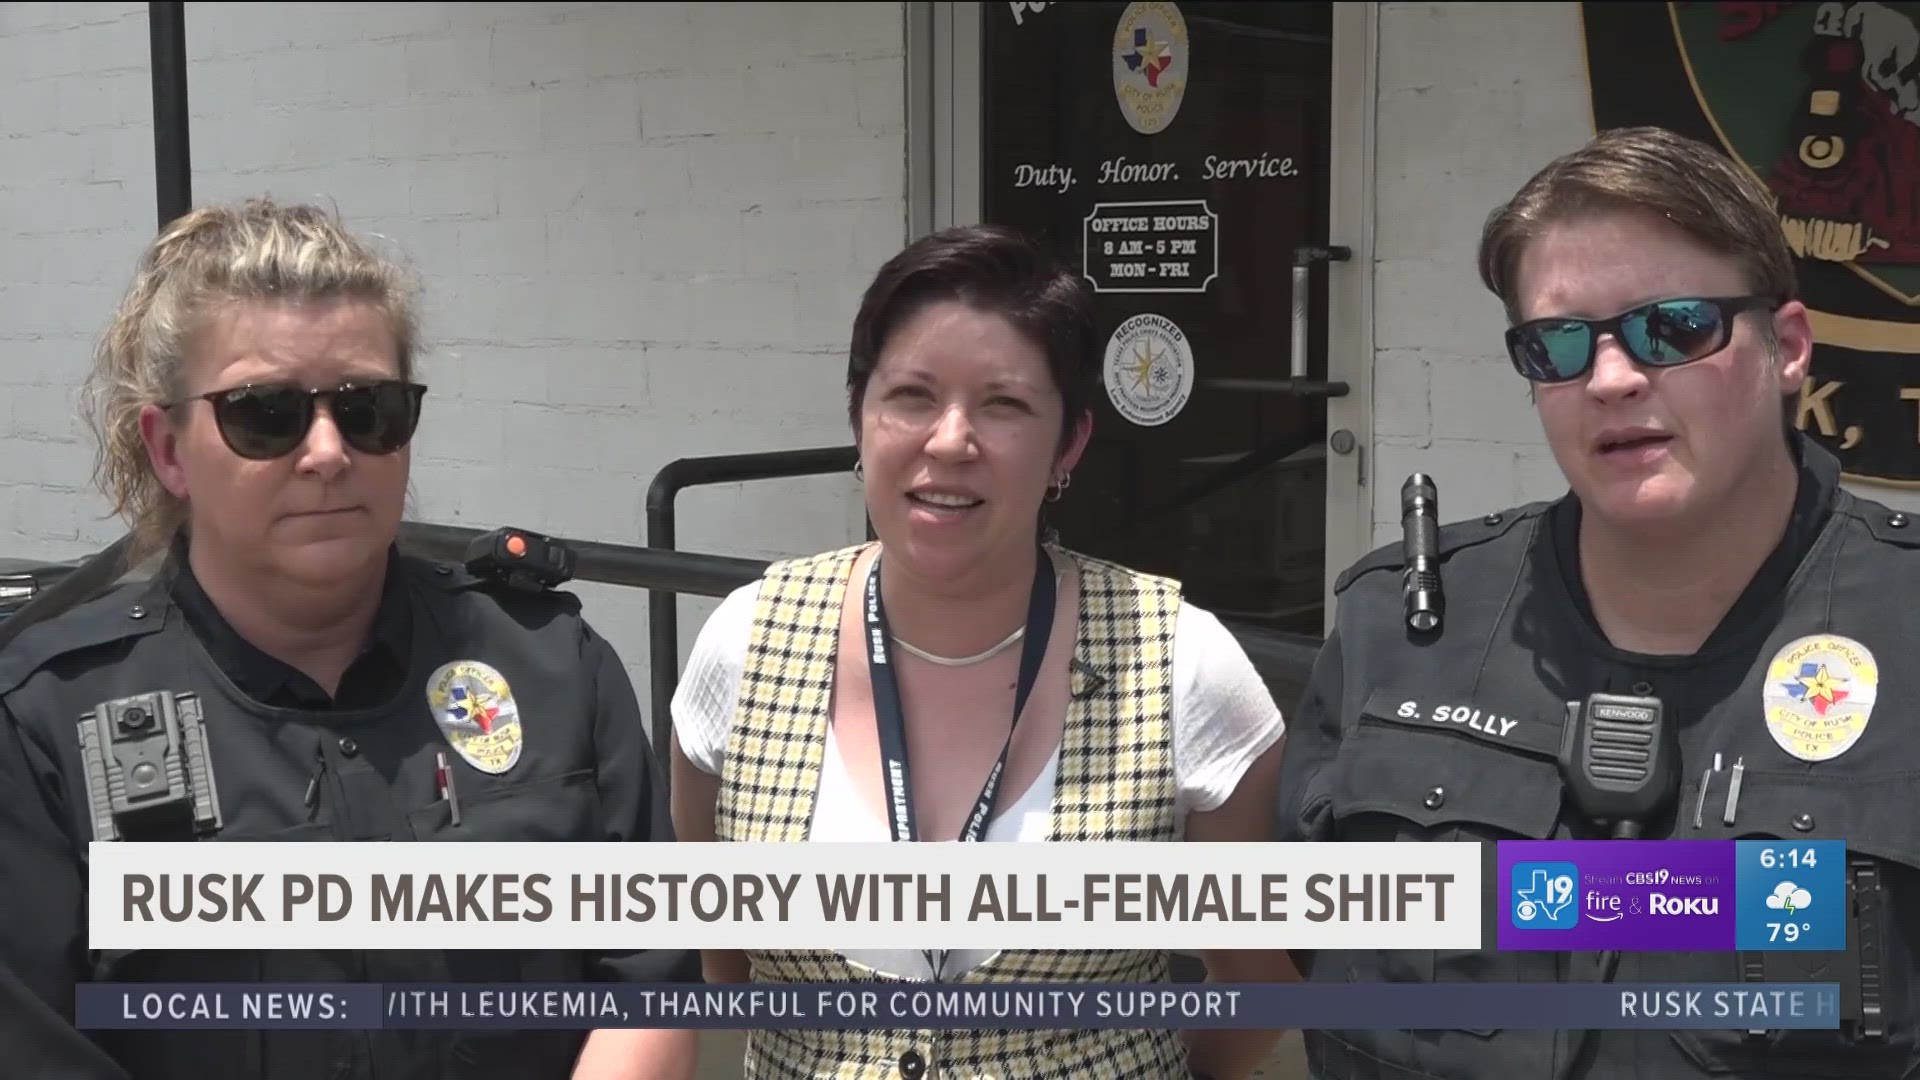 These ladies hope they inspire the next generation of women looking to work in law enforcement.